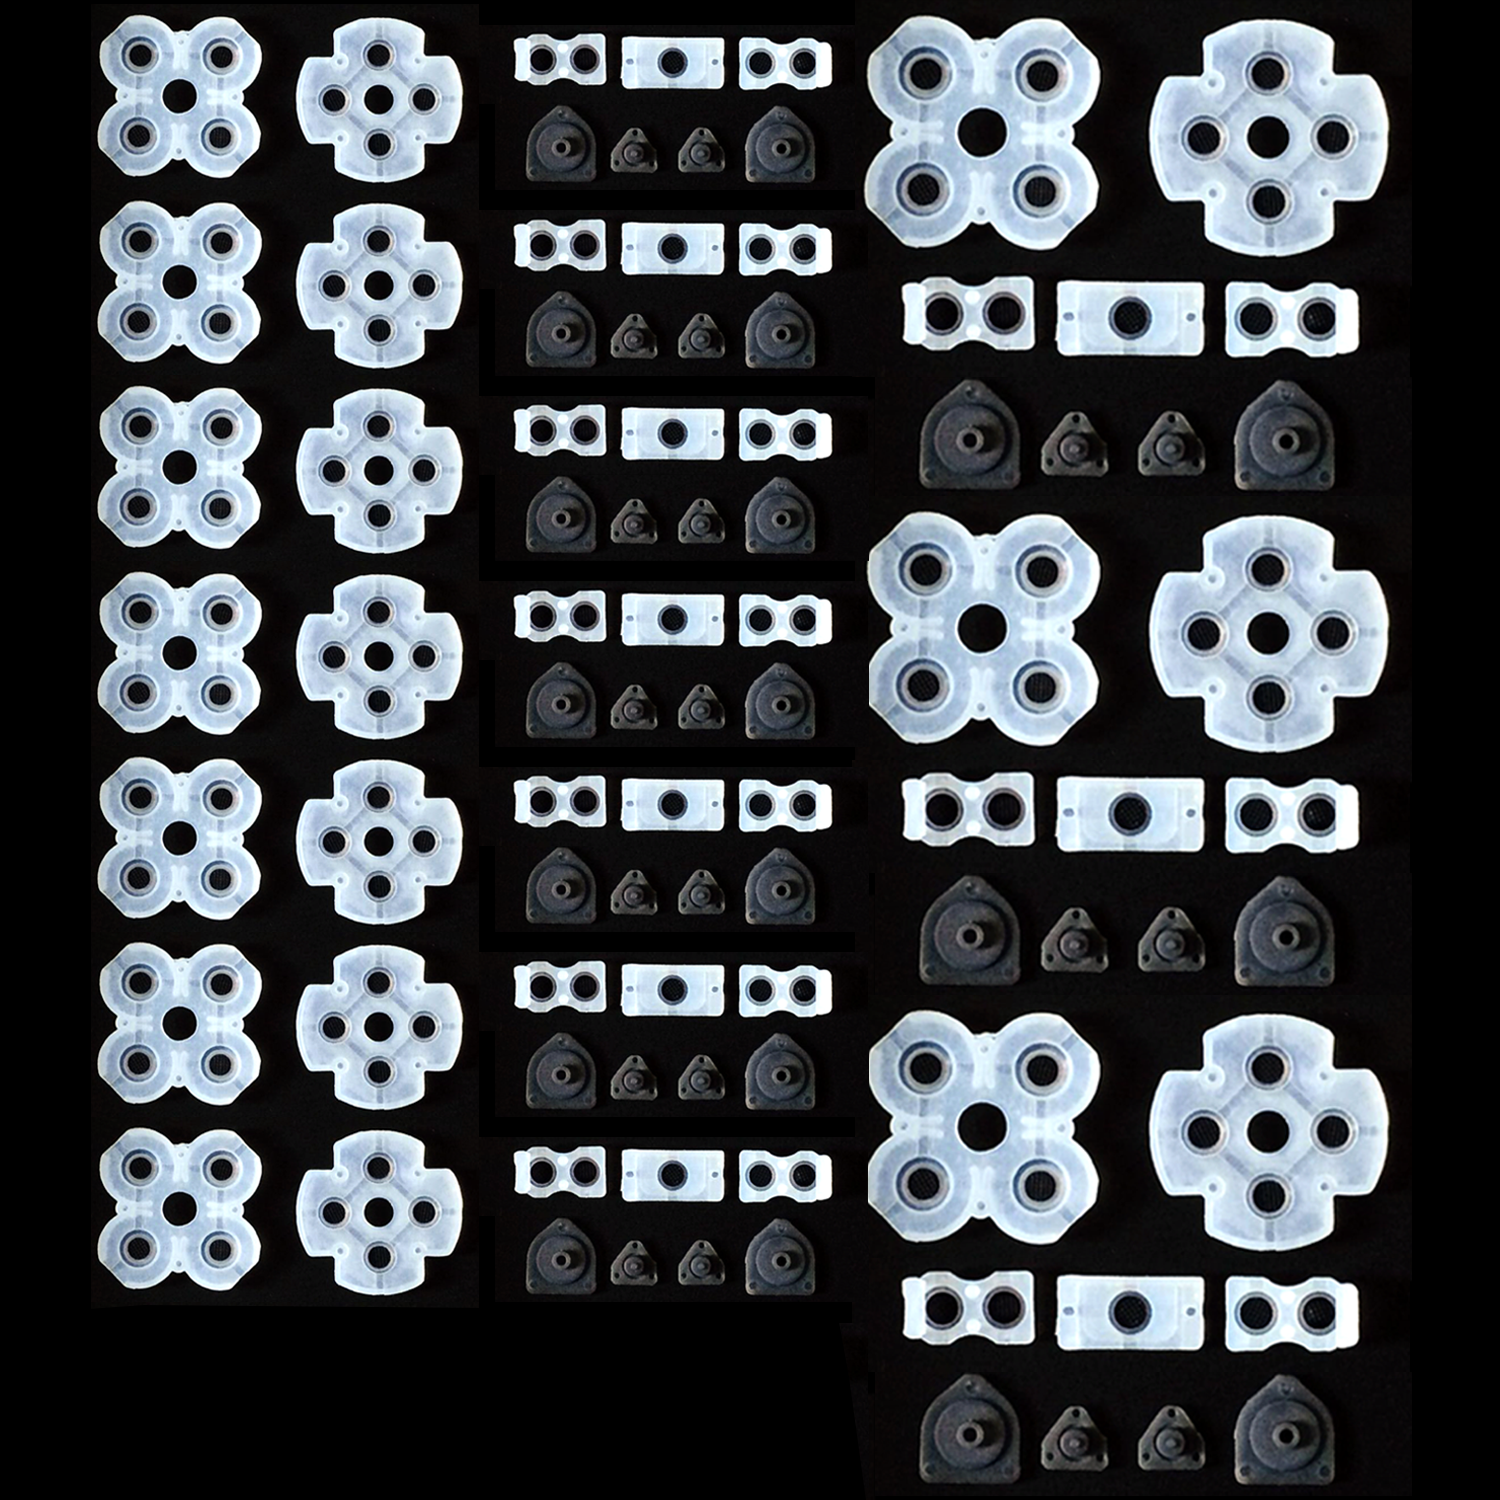 10 Set Replacement Conductive Silicone Rubber Pads for PS4 Controller Unbranded Does Not Apply